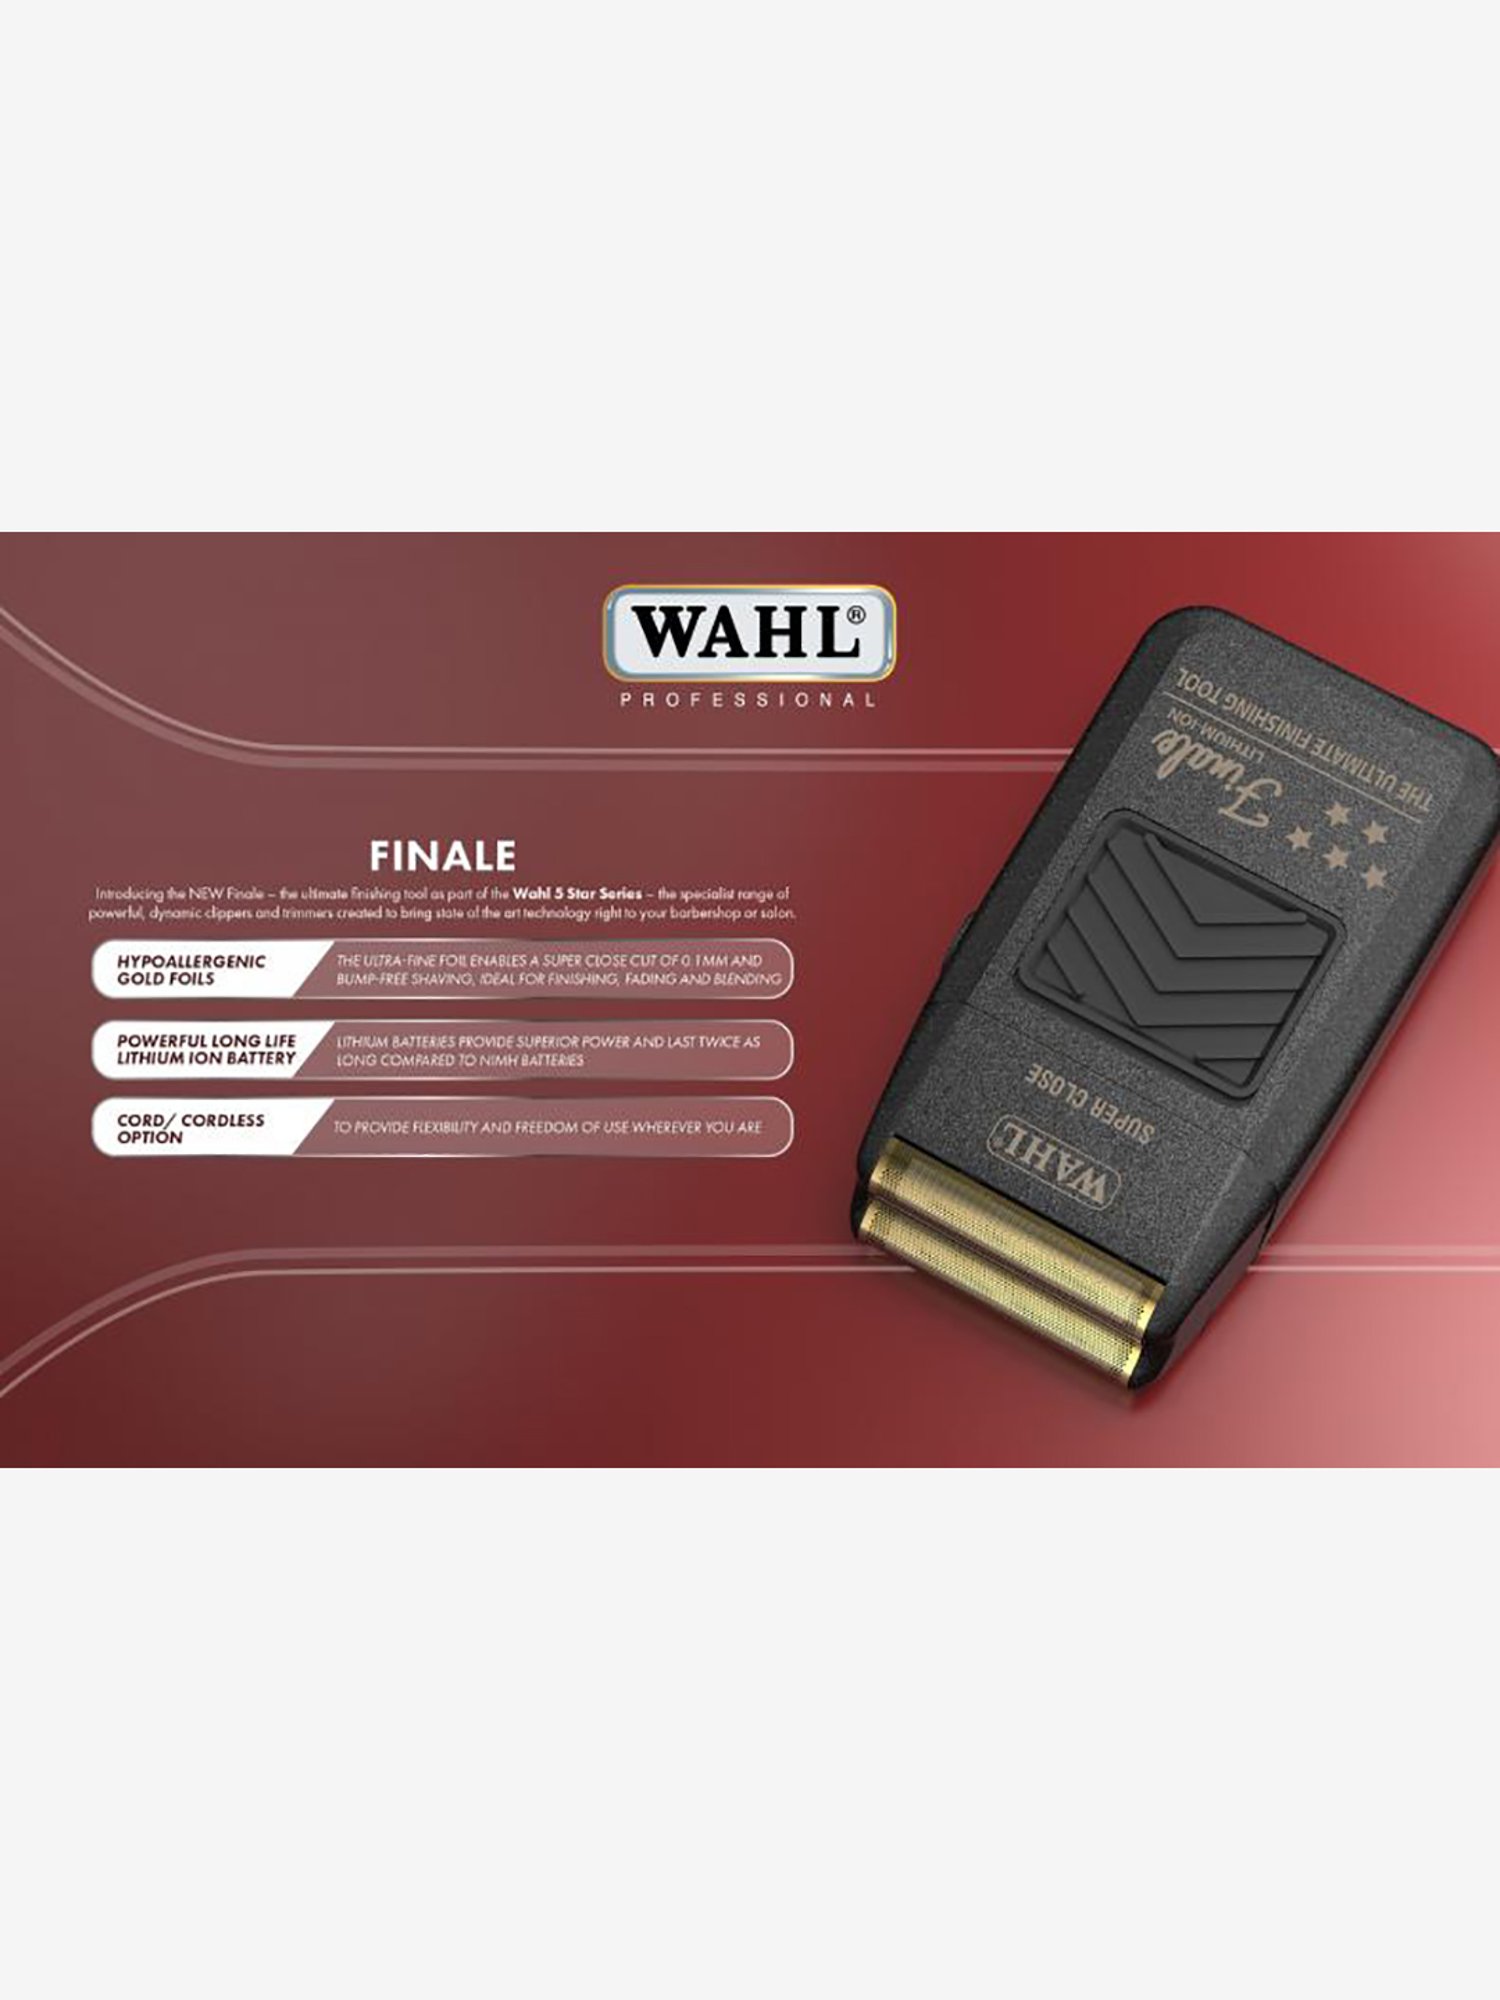  Wahl Professional 5 Star Finale Shaver with 90+ Minute Run  Time for Professional Barbers and Stylists : Beauty & Personal Care